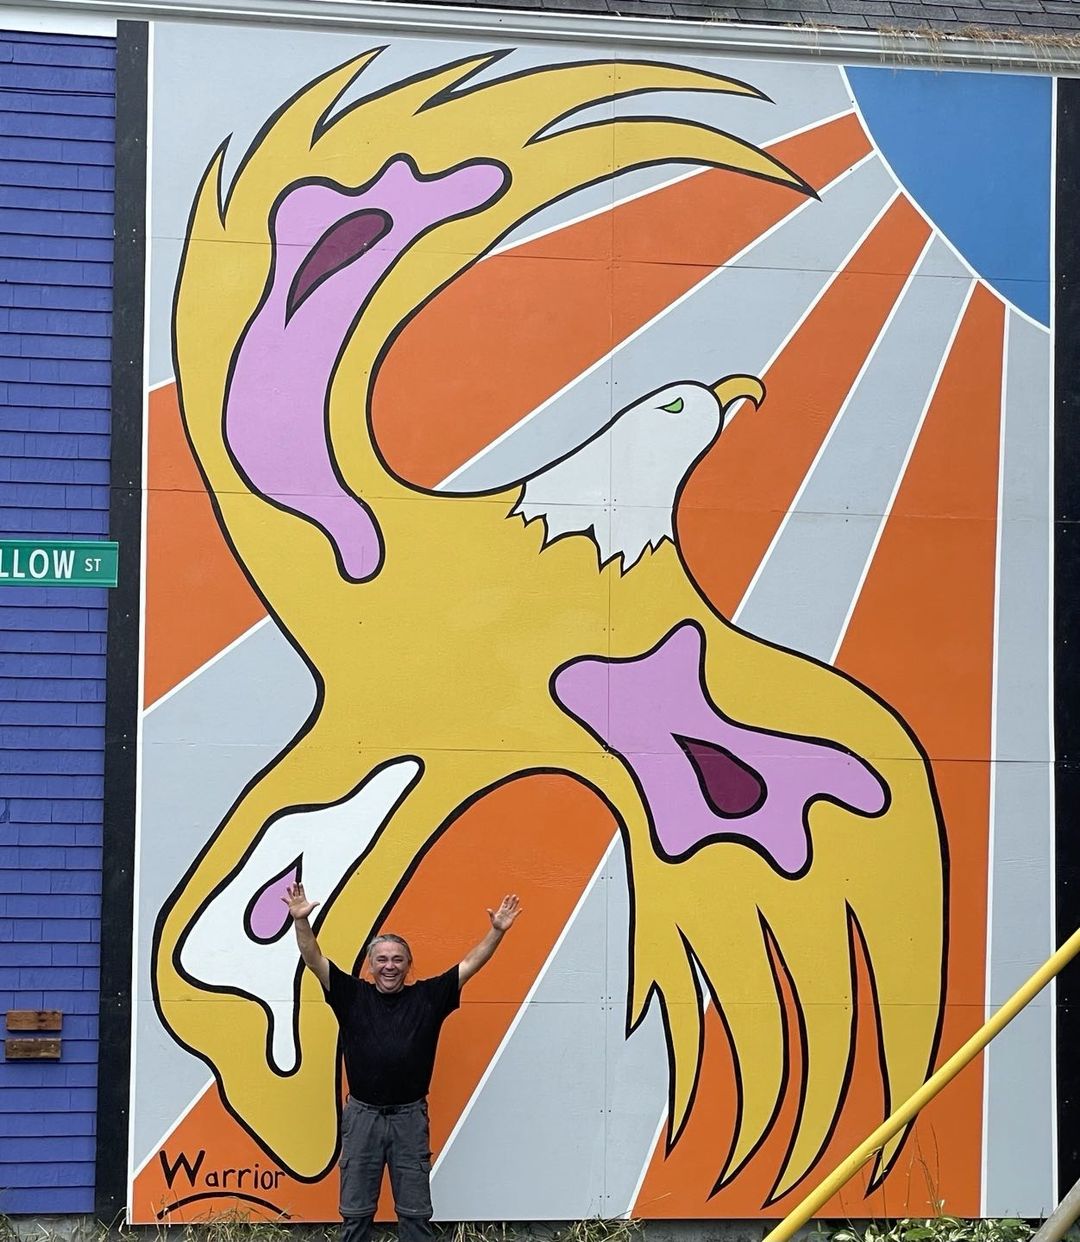 Lorne Julien stands in front of a brightly coloured mural depicting an eagle and a shining sun